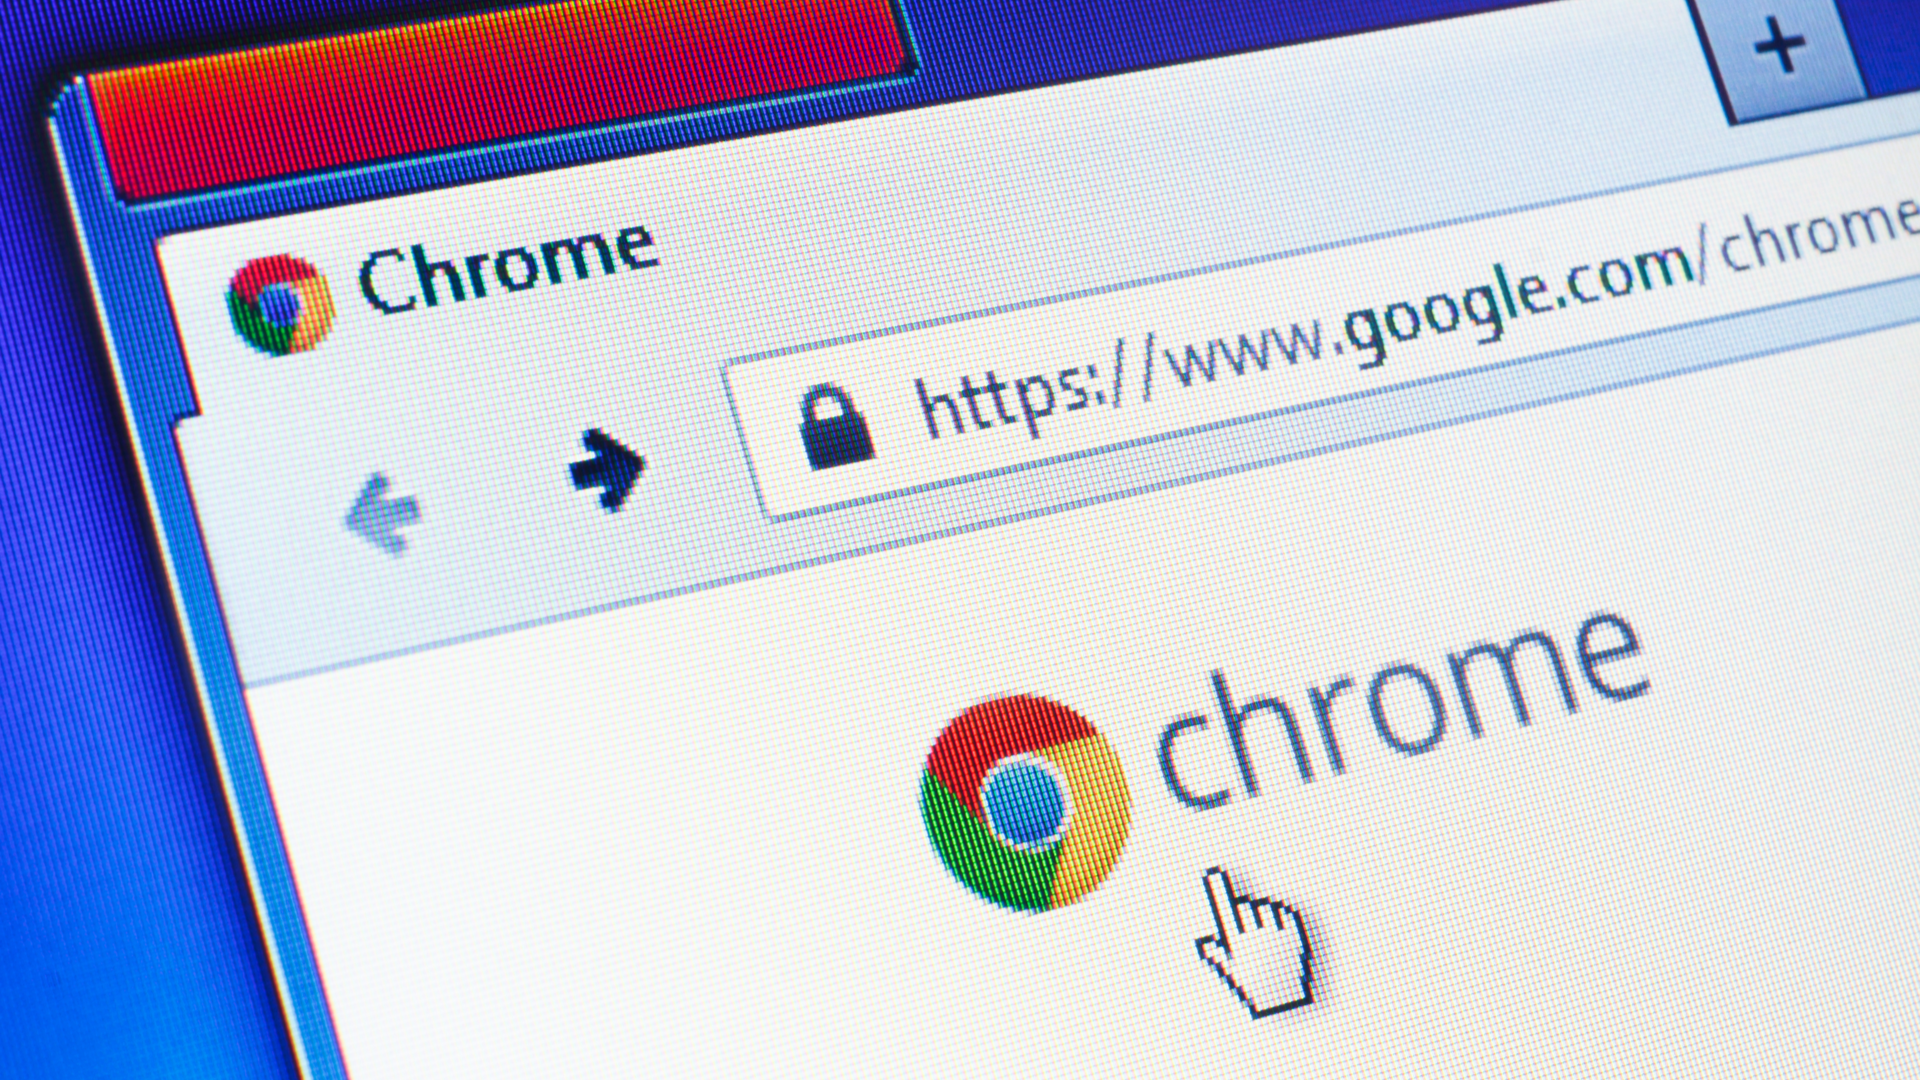 Google Chrome Takes a Colorful Cue from Android